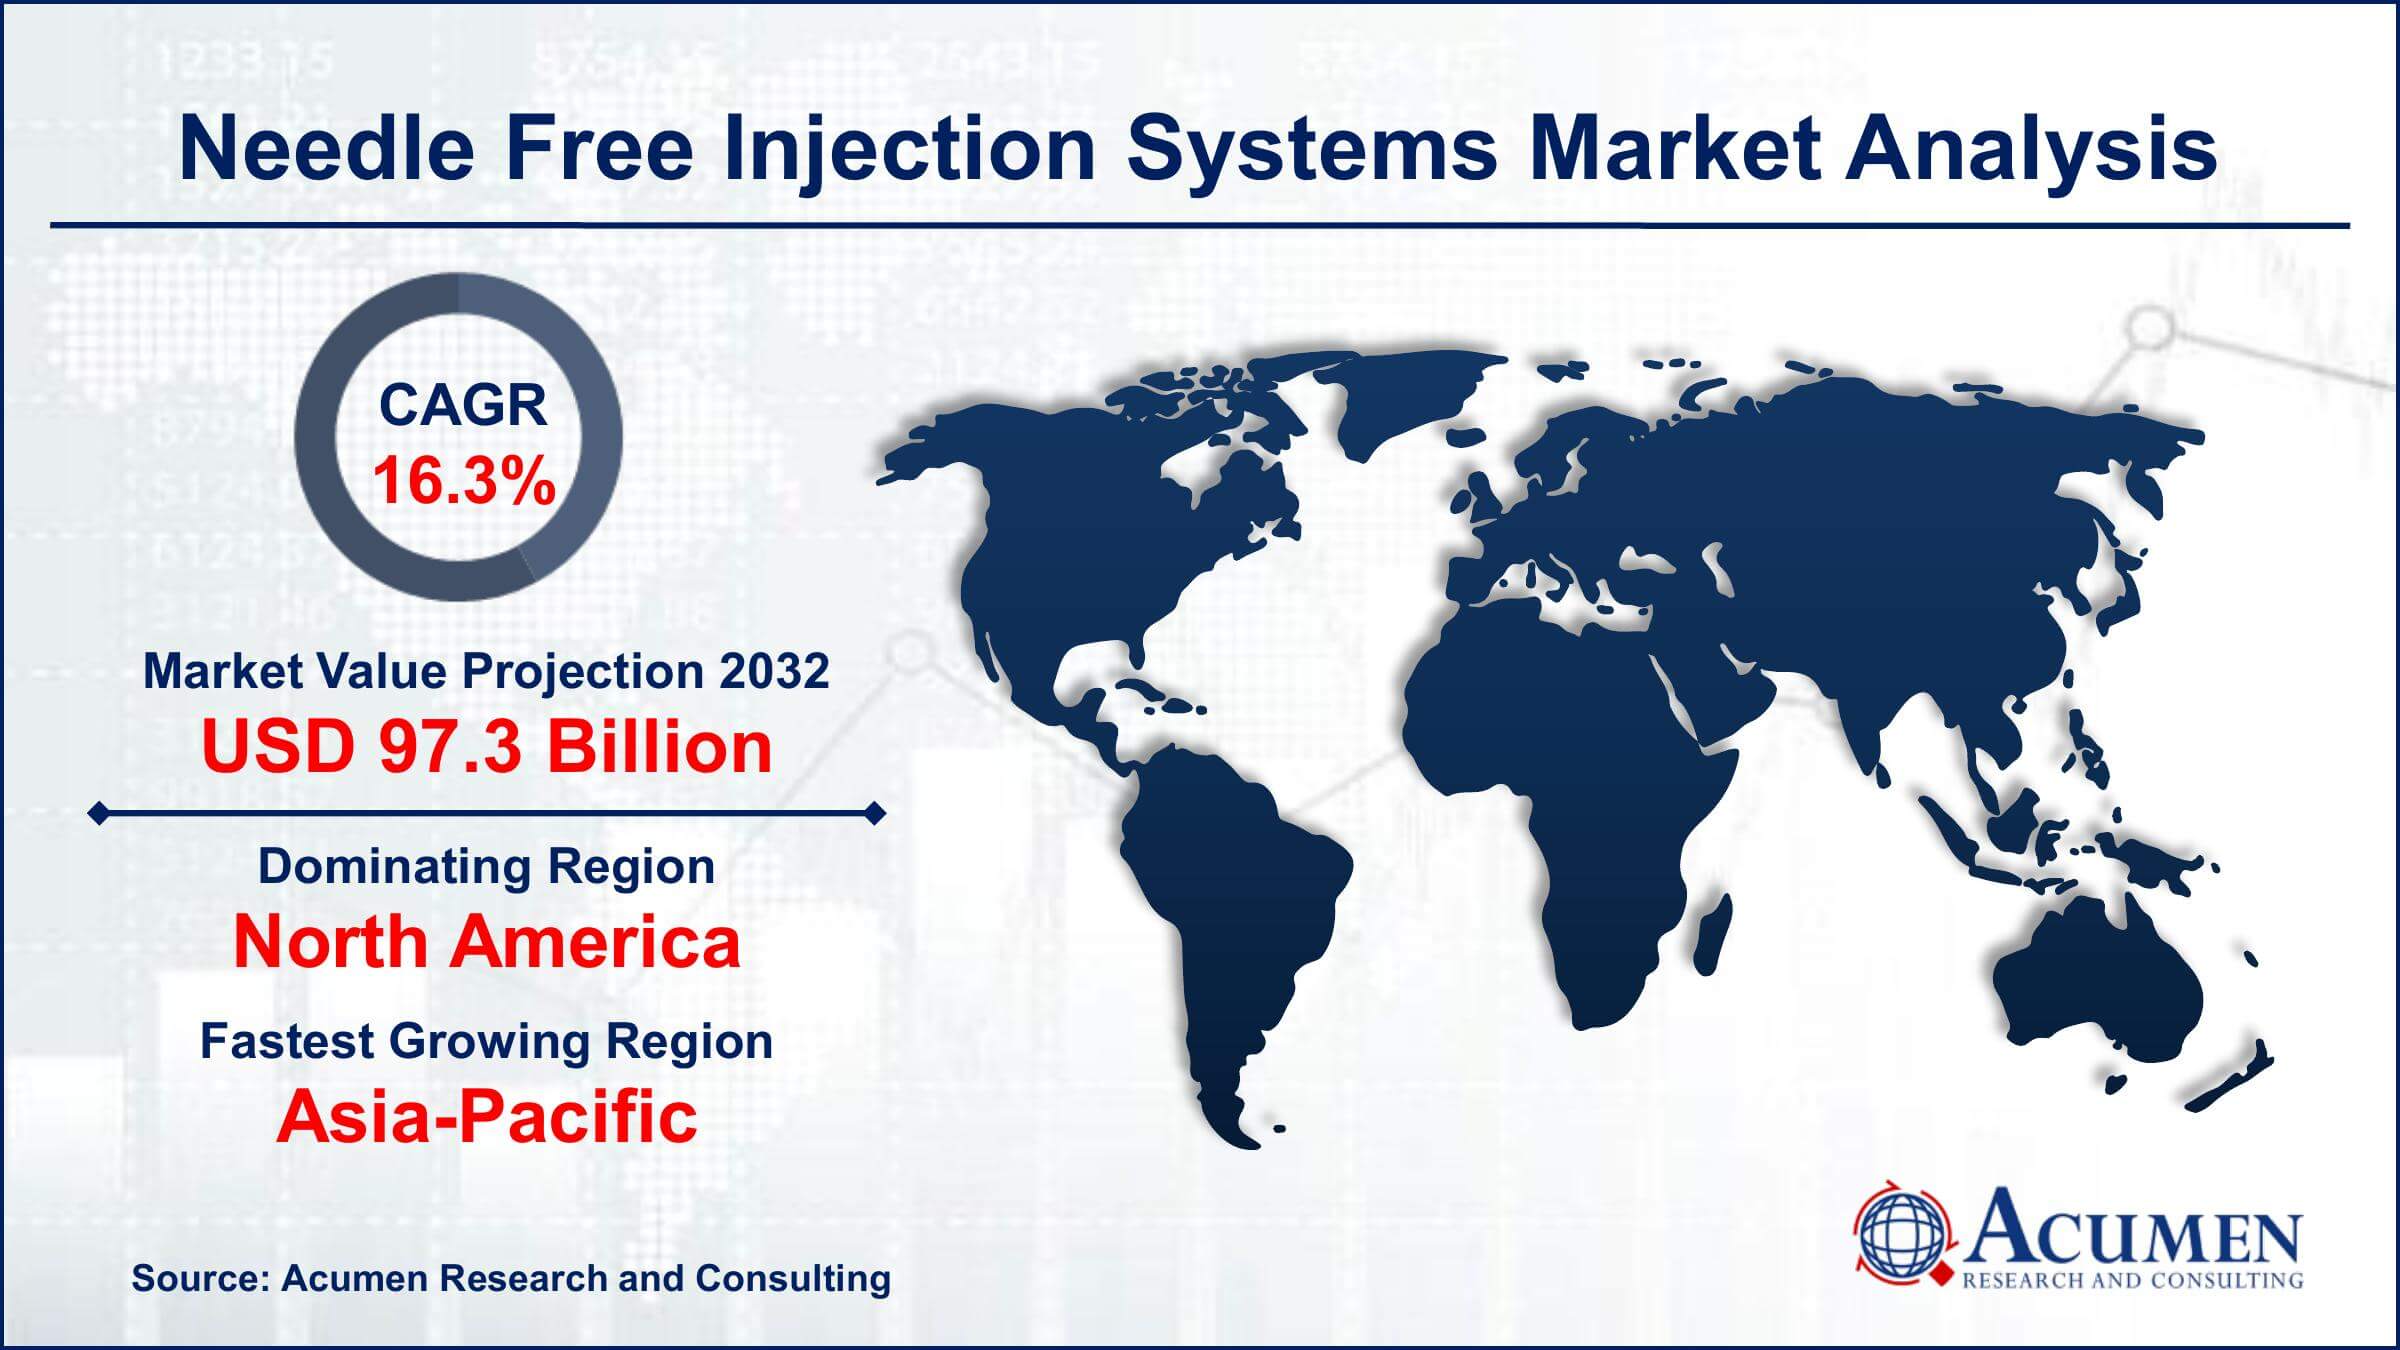 Global Needle Free Injection Systems Market Trends